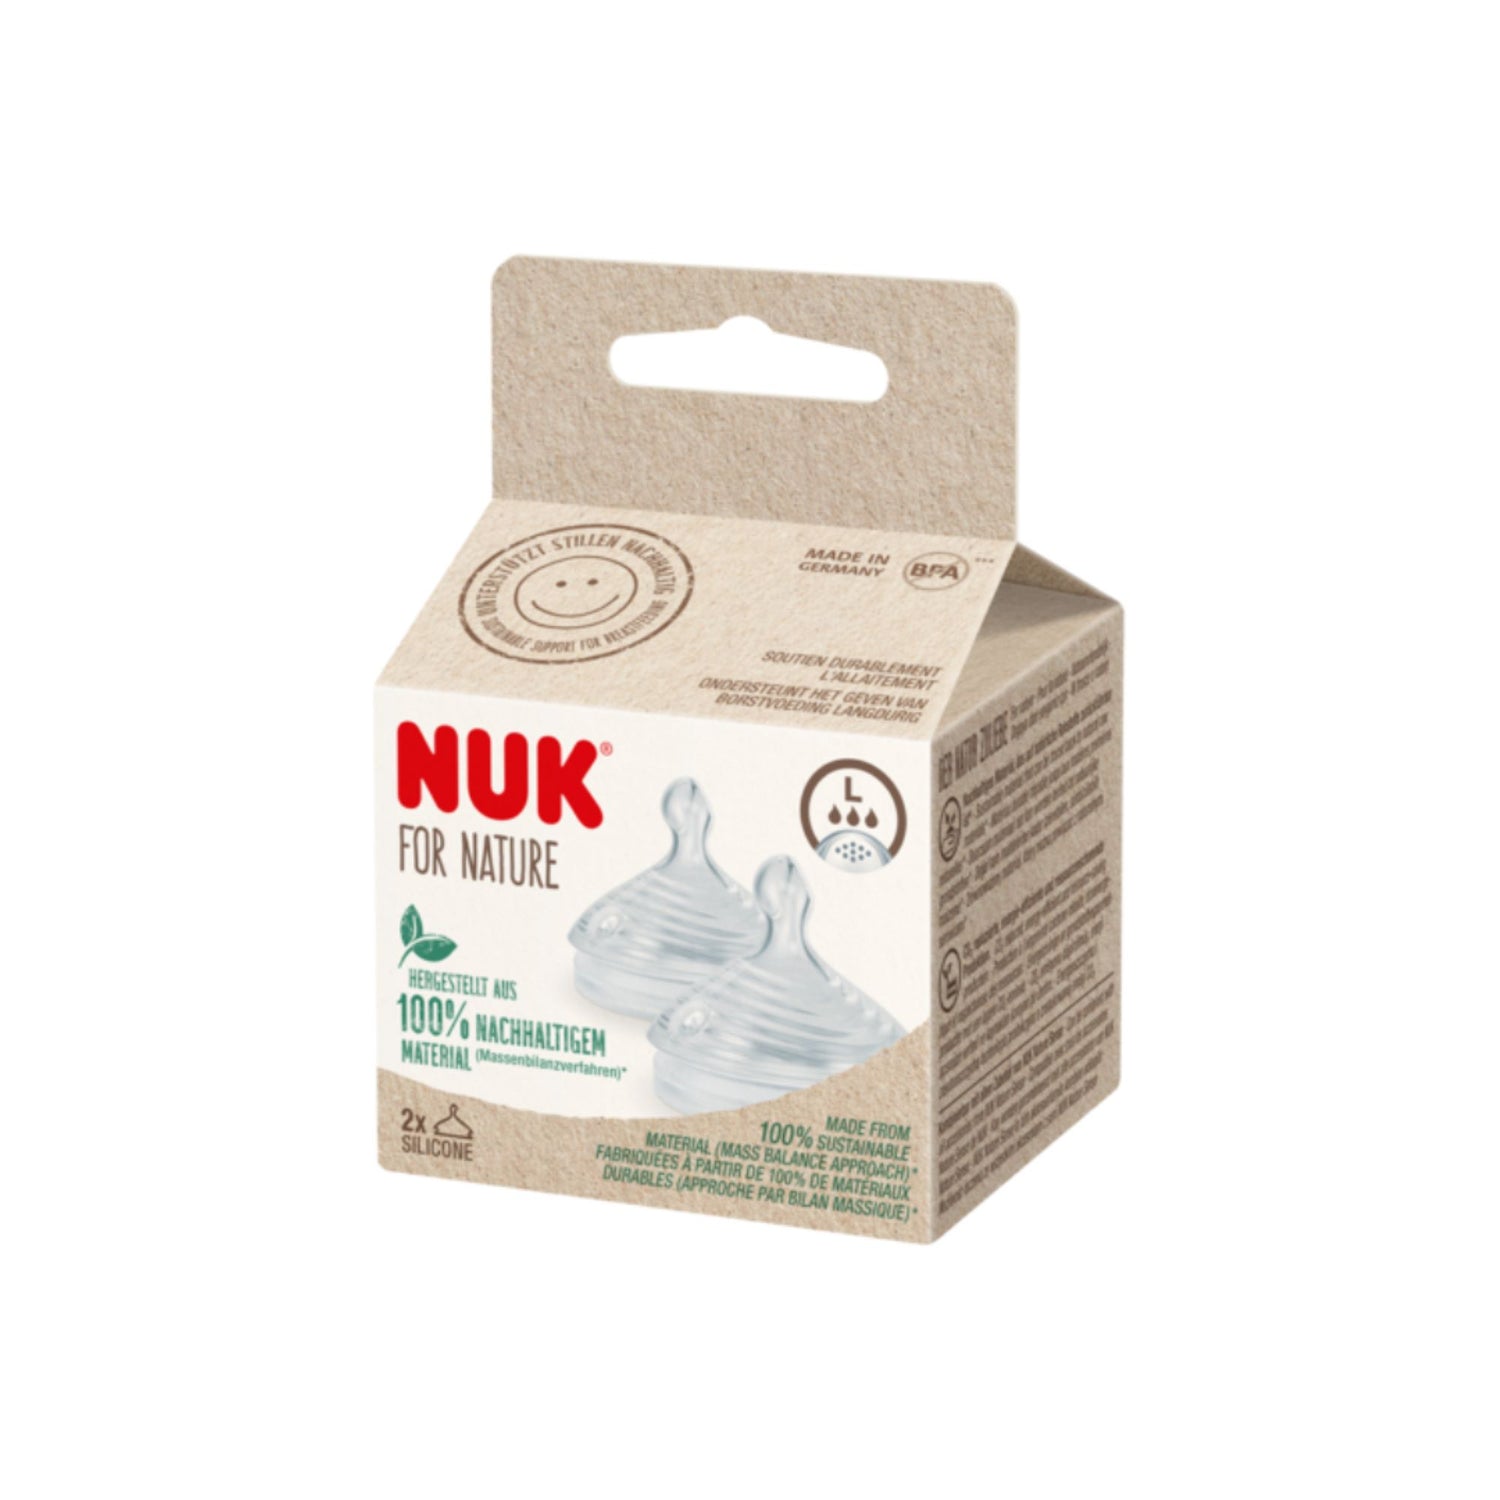 NUK For Nature Large Teat 2 Pack 